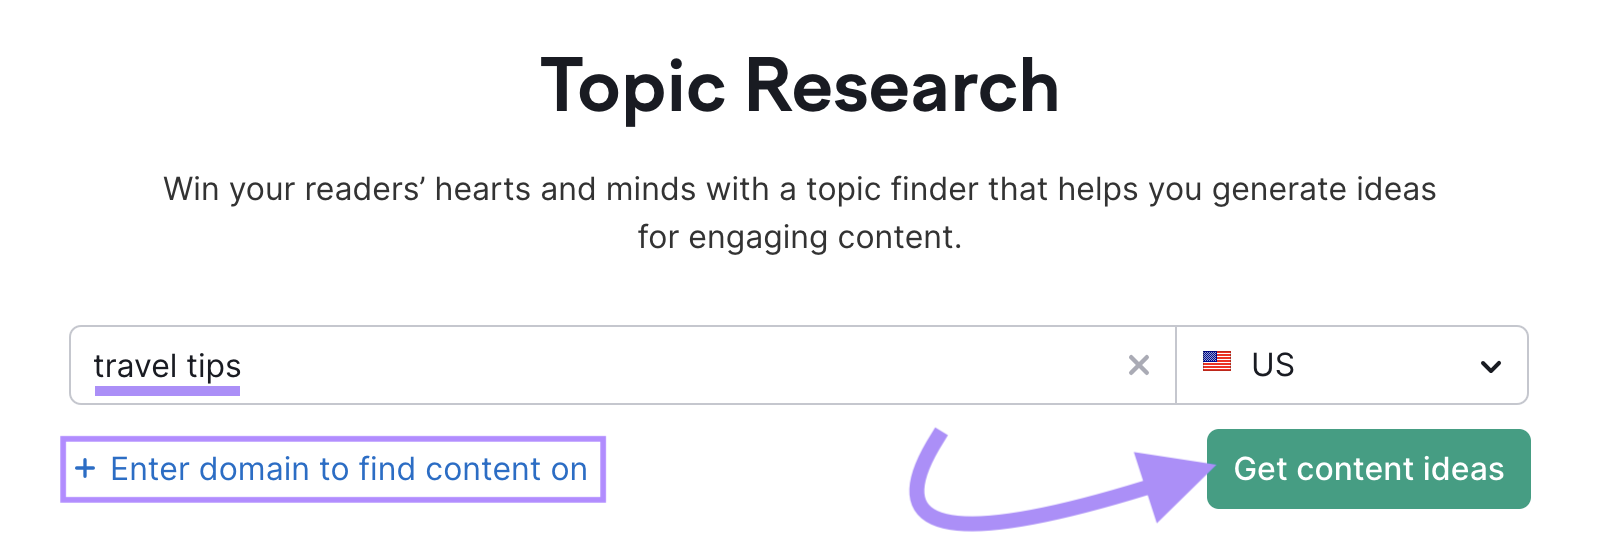 "travel tips" entered into the Topic Research search bar